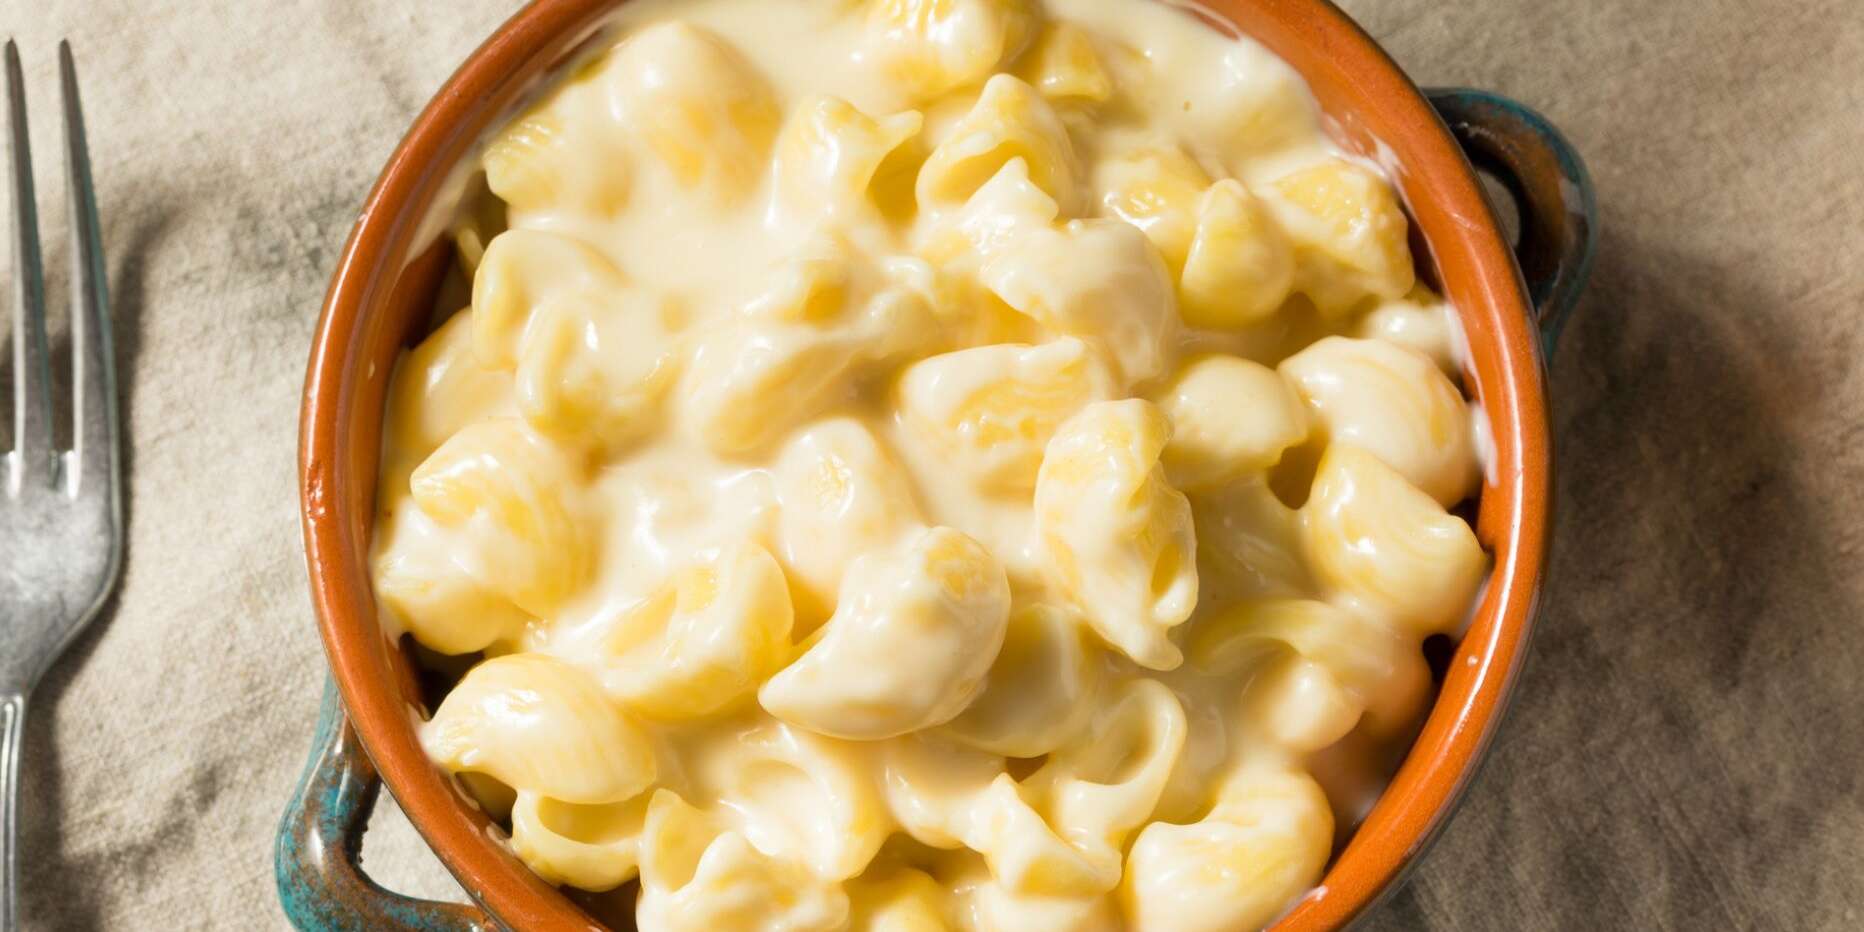 This Incredible Homemade Mac and Cheese Uses Only 3 Ingredients